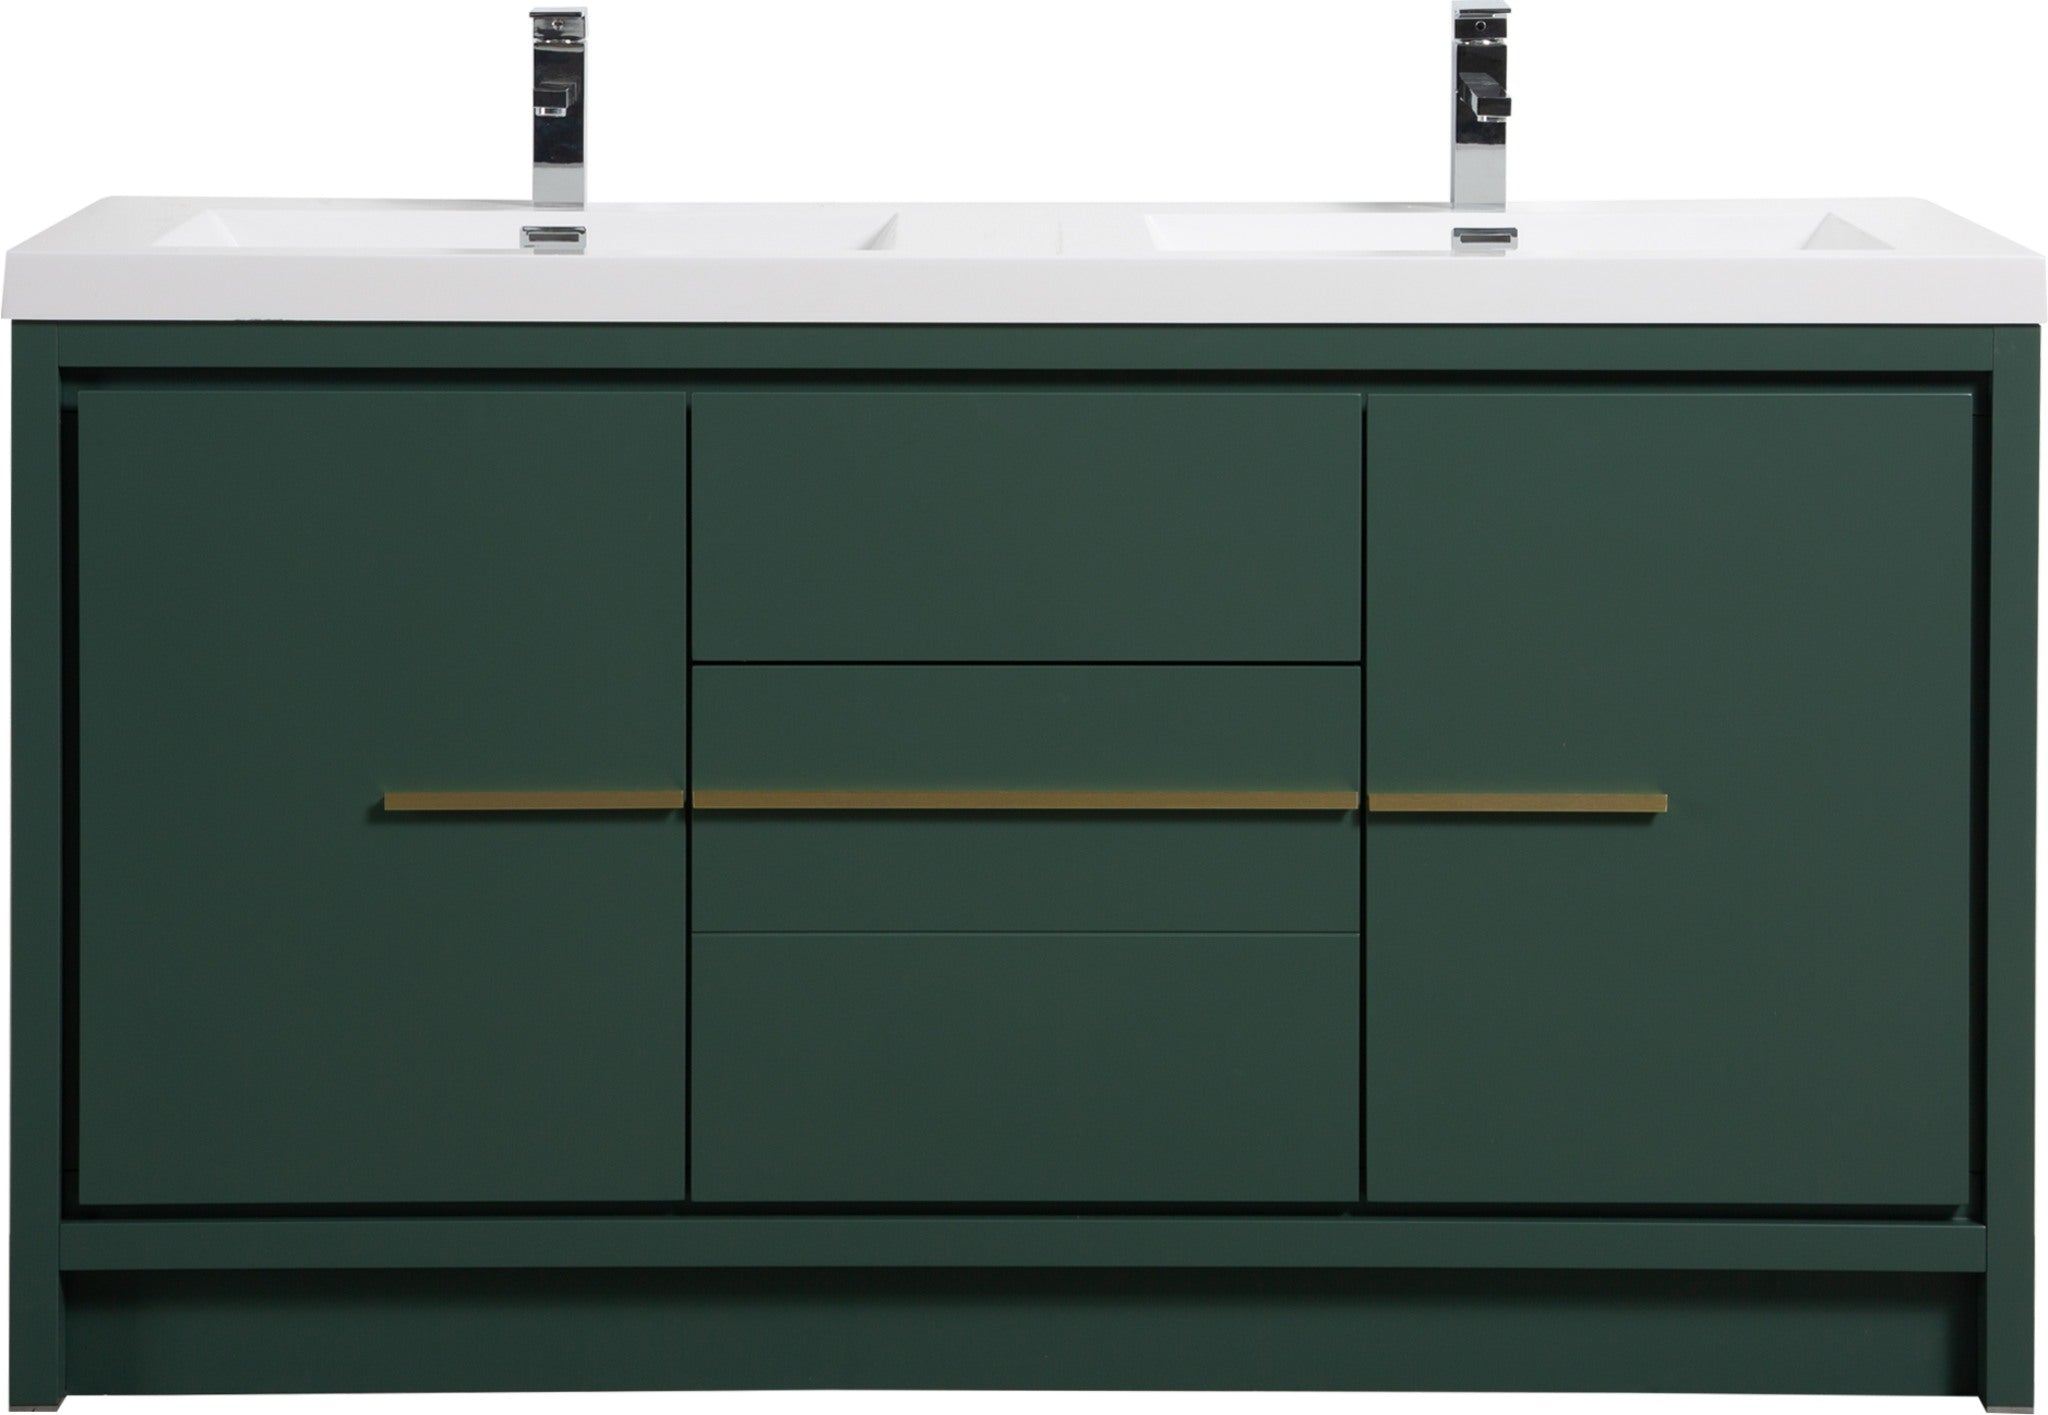 Granada 59 Nordic Green With Brush Gold Handle Cabinet, Square Cultured Marble Double Sink, Free Standing Modern Vanity Set